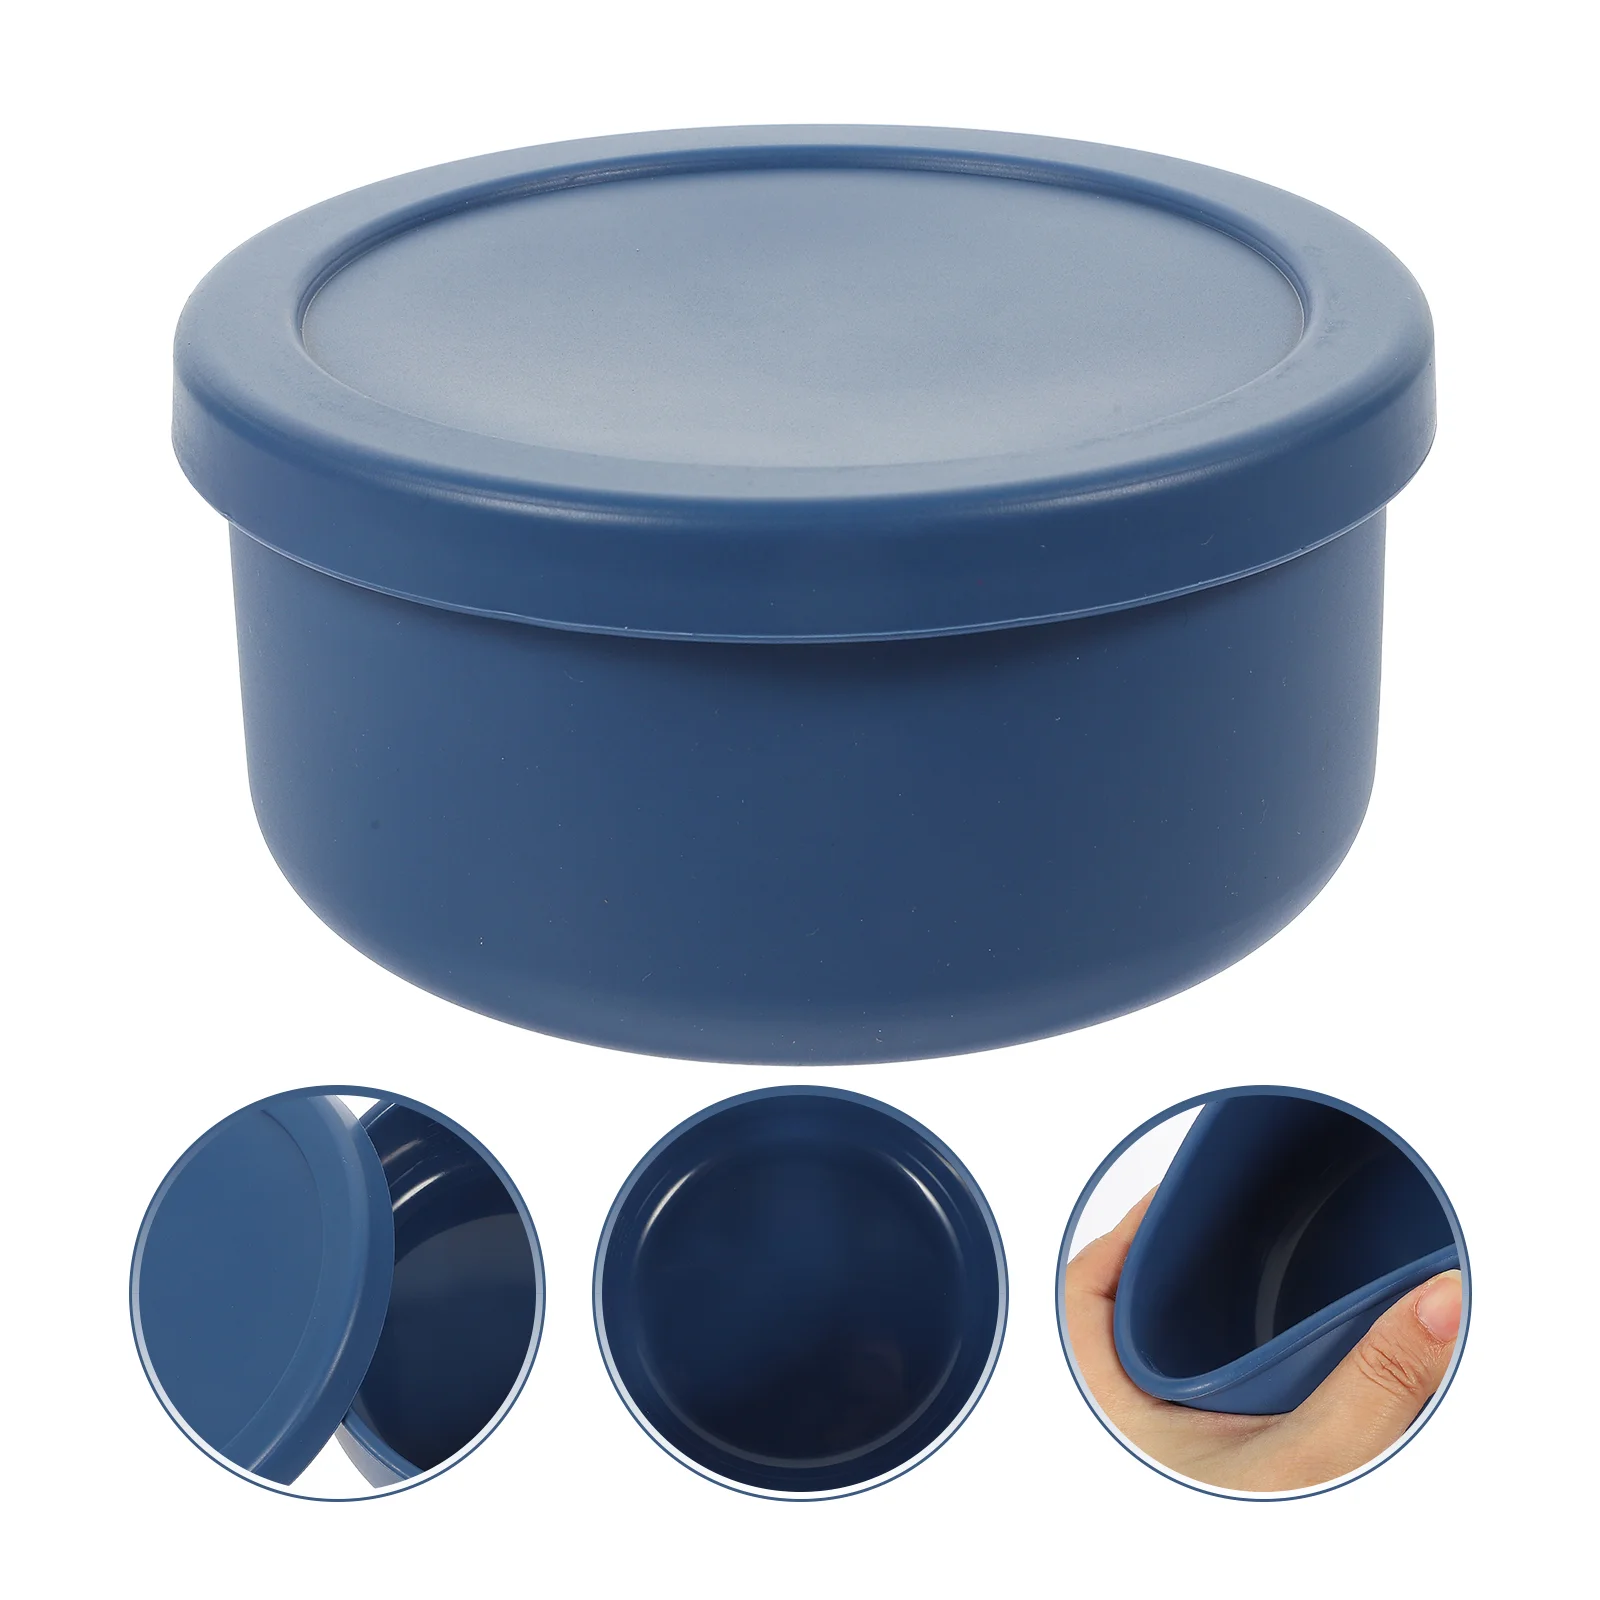 

Dough Fermentation Container Kitchen Supply Vegetable Tray With Lid Supplies Reusable Silica Gel Compact Bowl